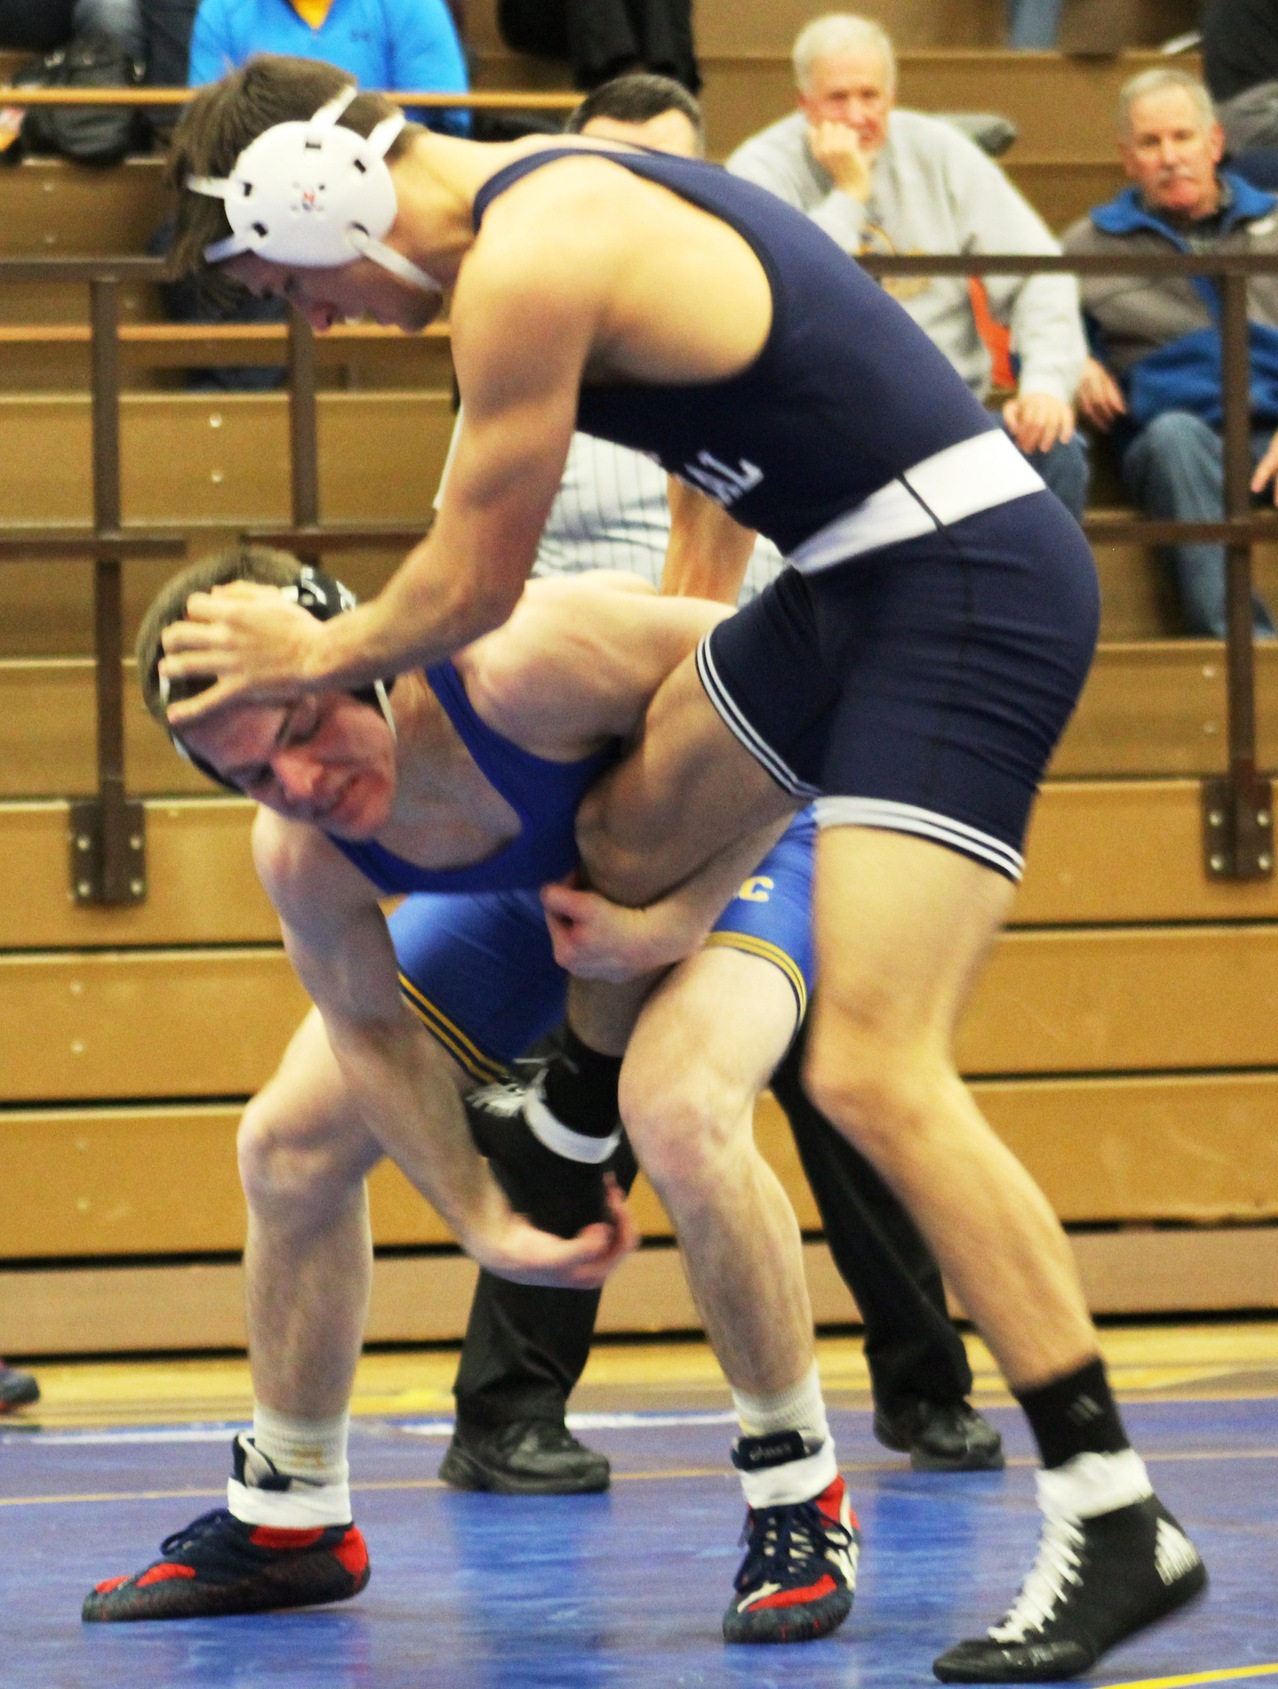 NIACC's Tucker Black tries for a takedown against Merrick Purcell in their 165-pound match Wednesday night in the NIACC gym. Black won 8-3.